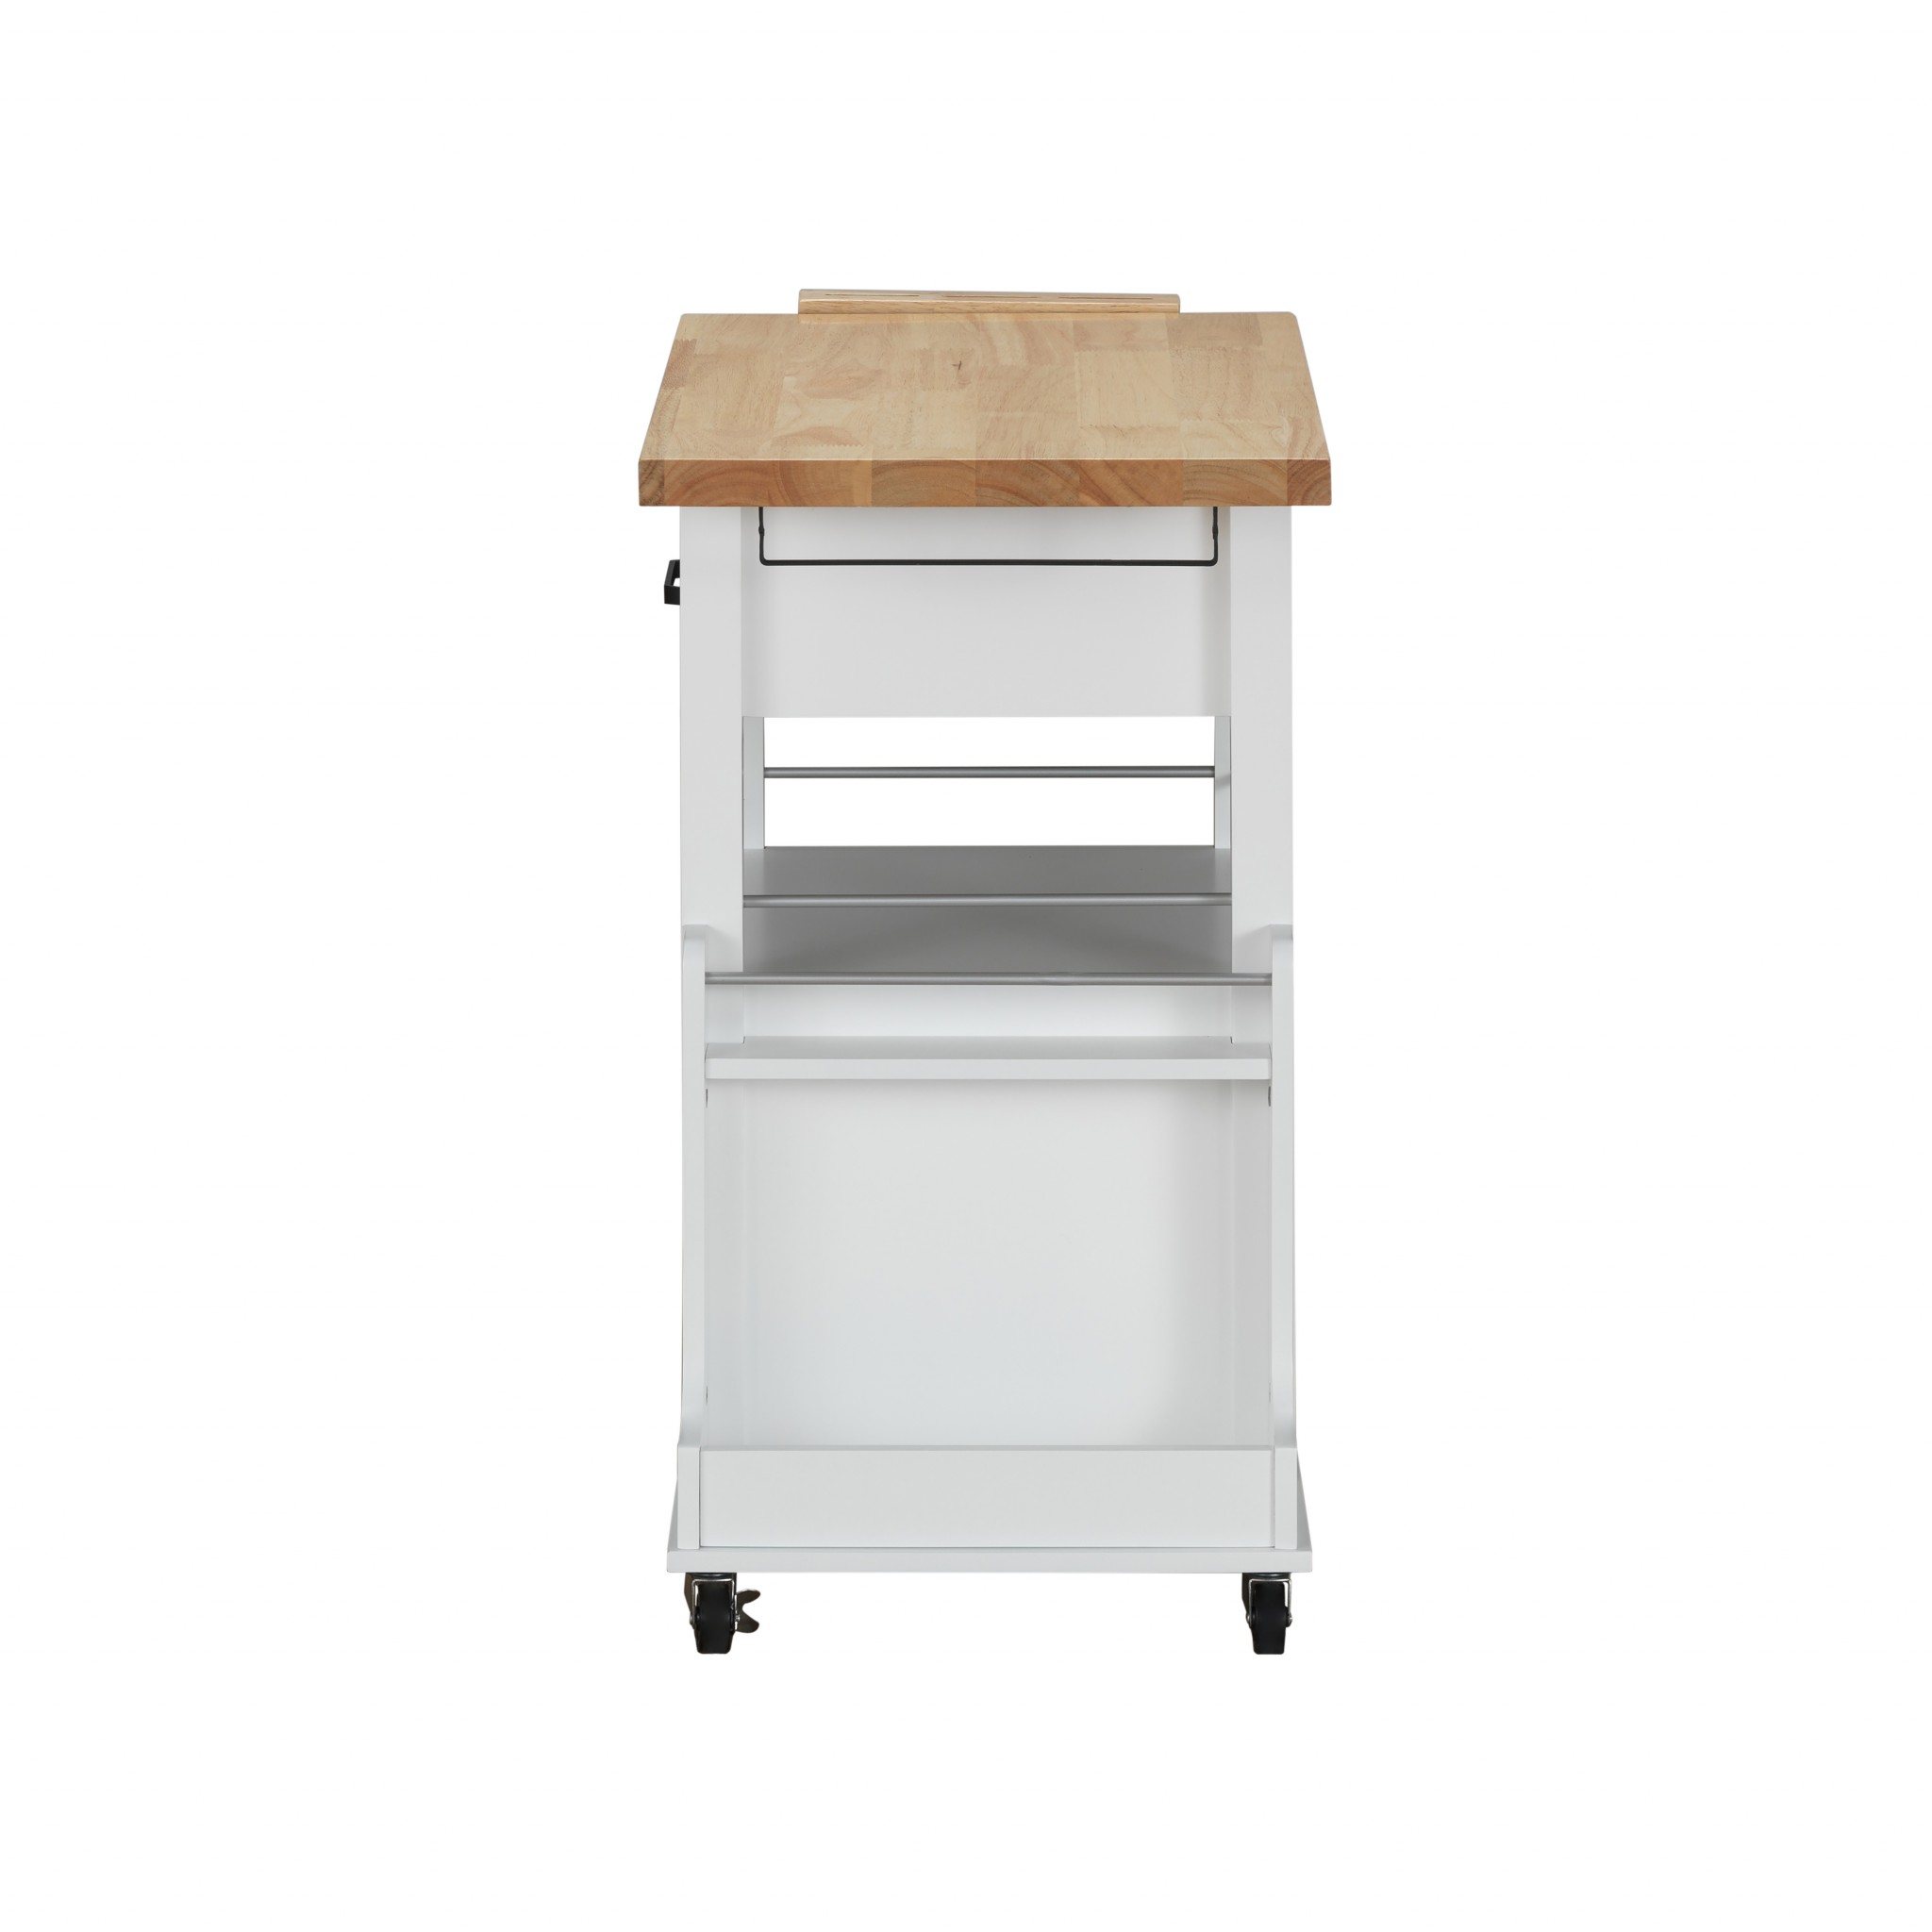 19" X 35" X 35" Natural White Wood Casters Kitchen Cart